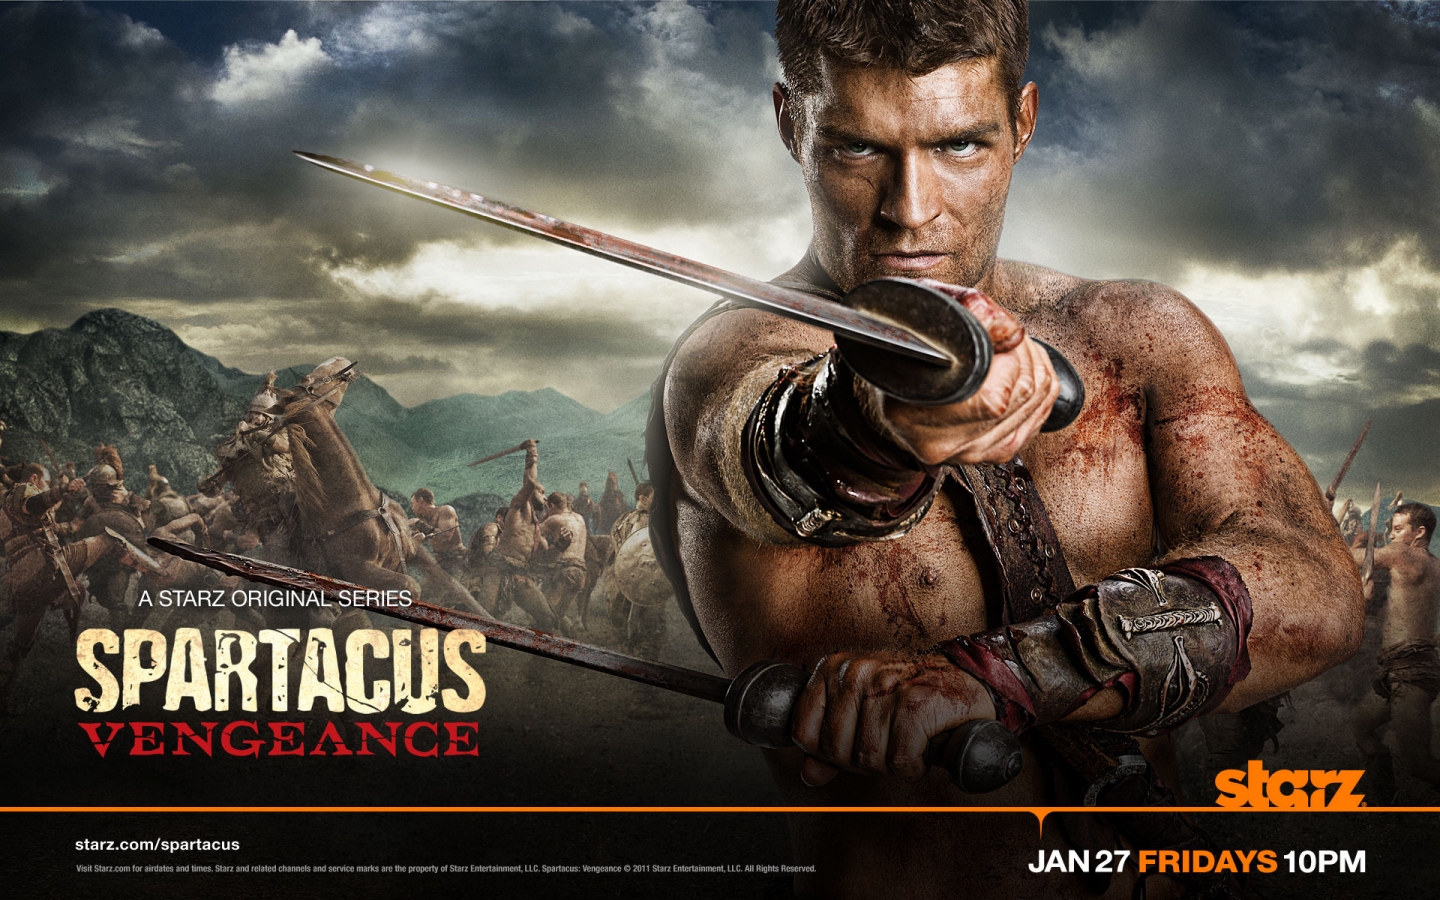 Tv Show Spartacus Vengeance for 1440 x 900 widescreen resolution